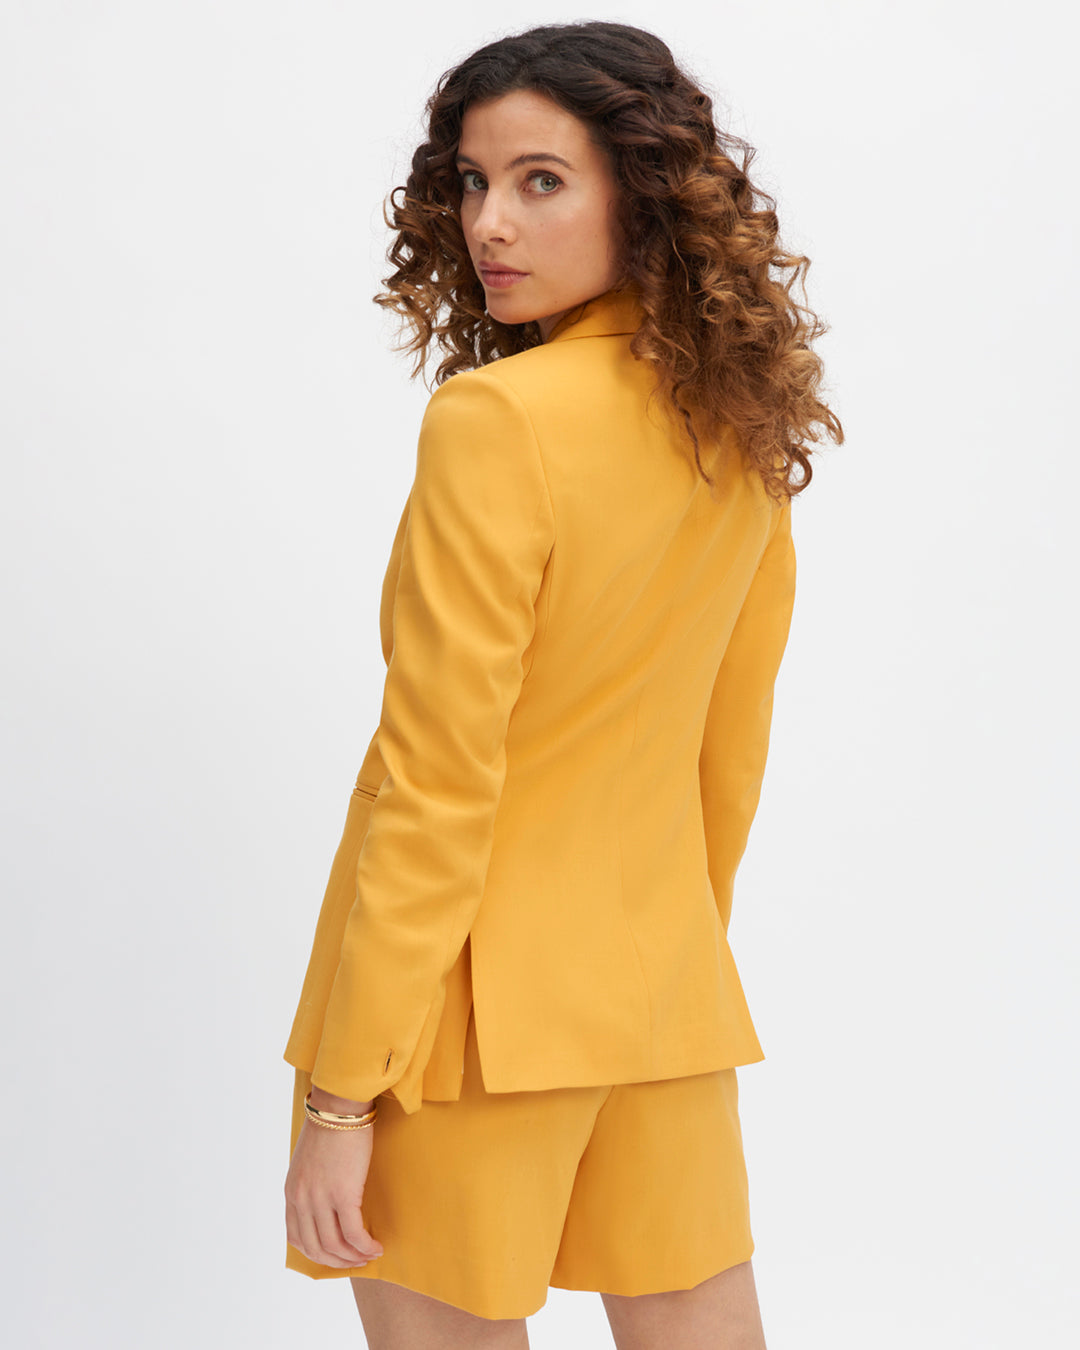 Long-sleeved jacket-yellow-cropped-and-curved-sleeved-collar-detachable-belt-toned-on-toned-two-short-slits-on-the-back-for-a-pretty-tumble